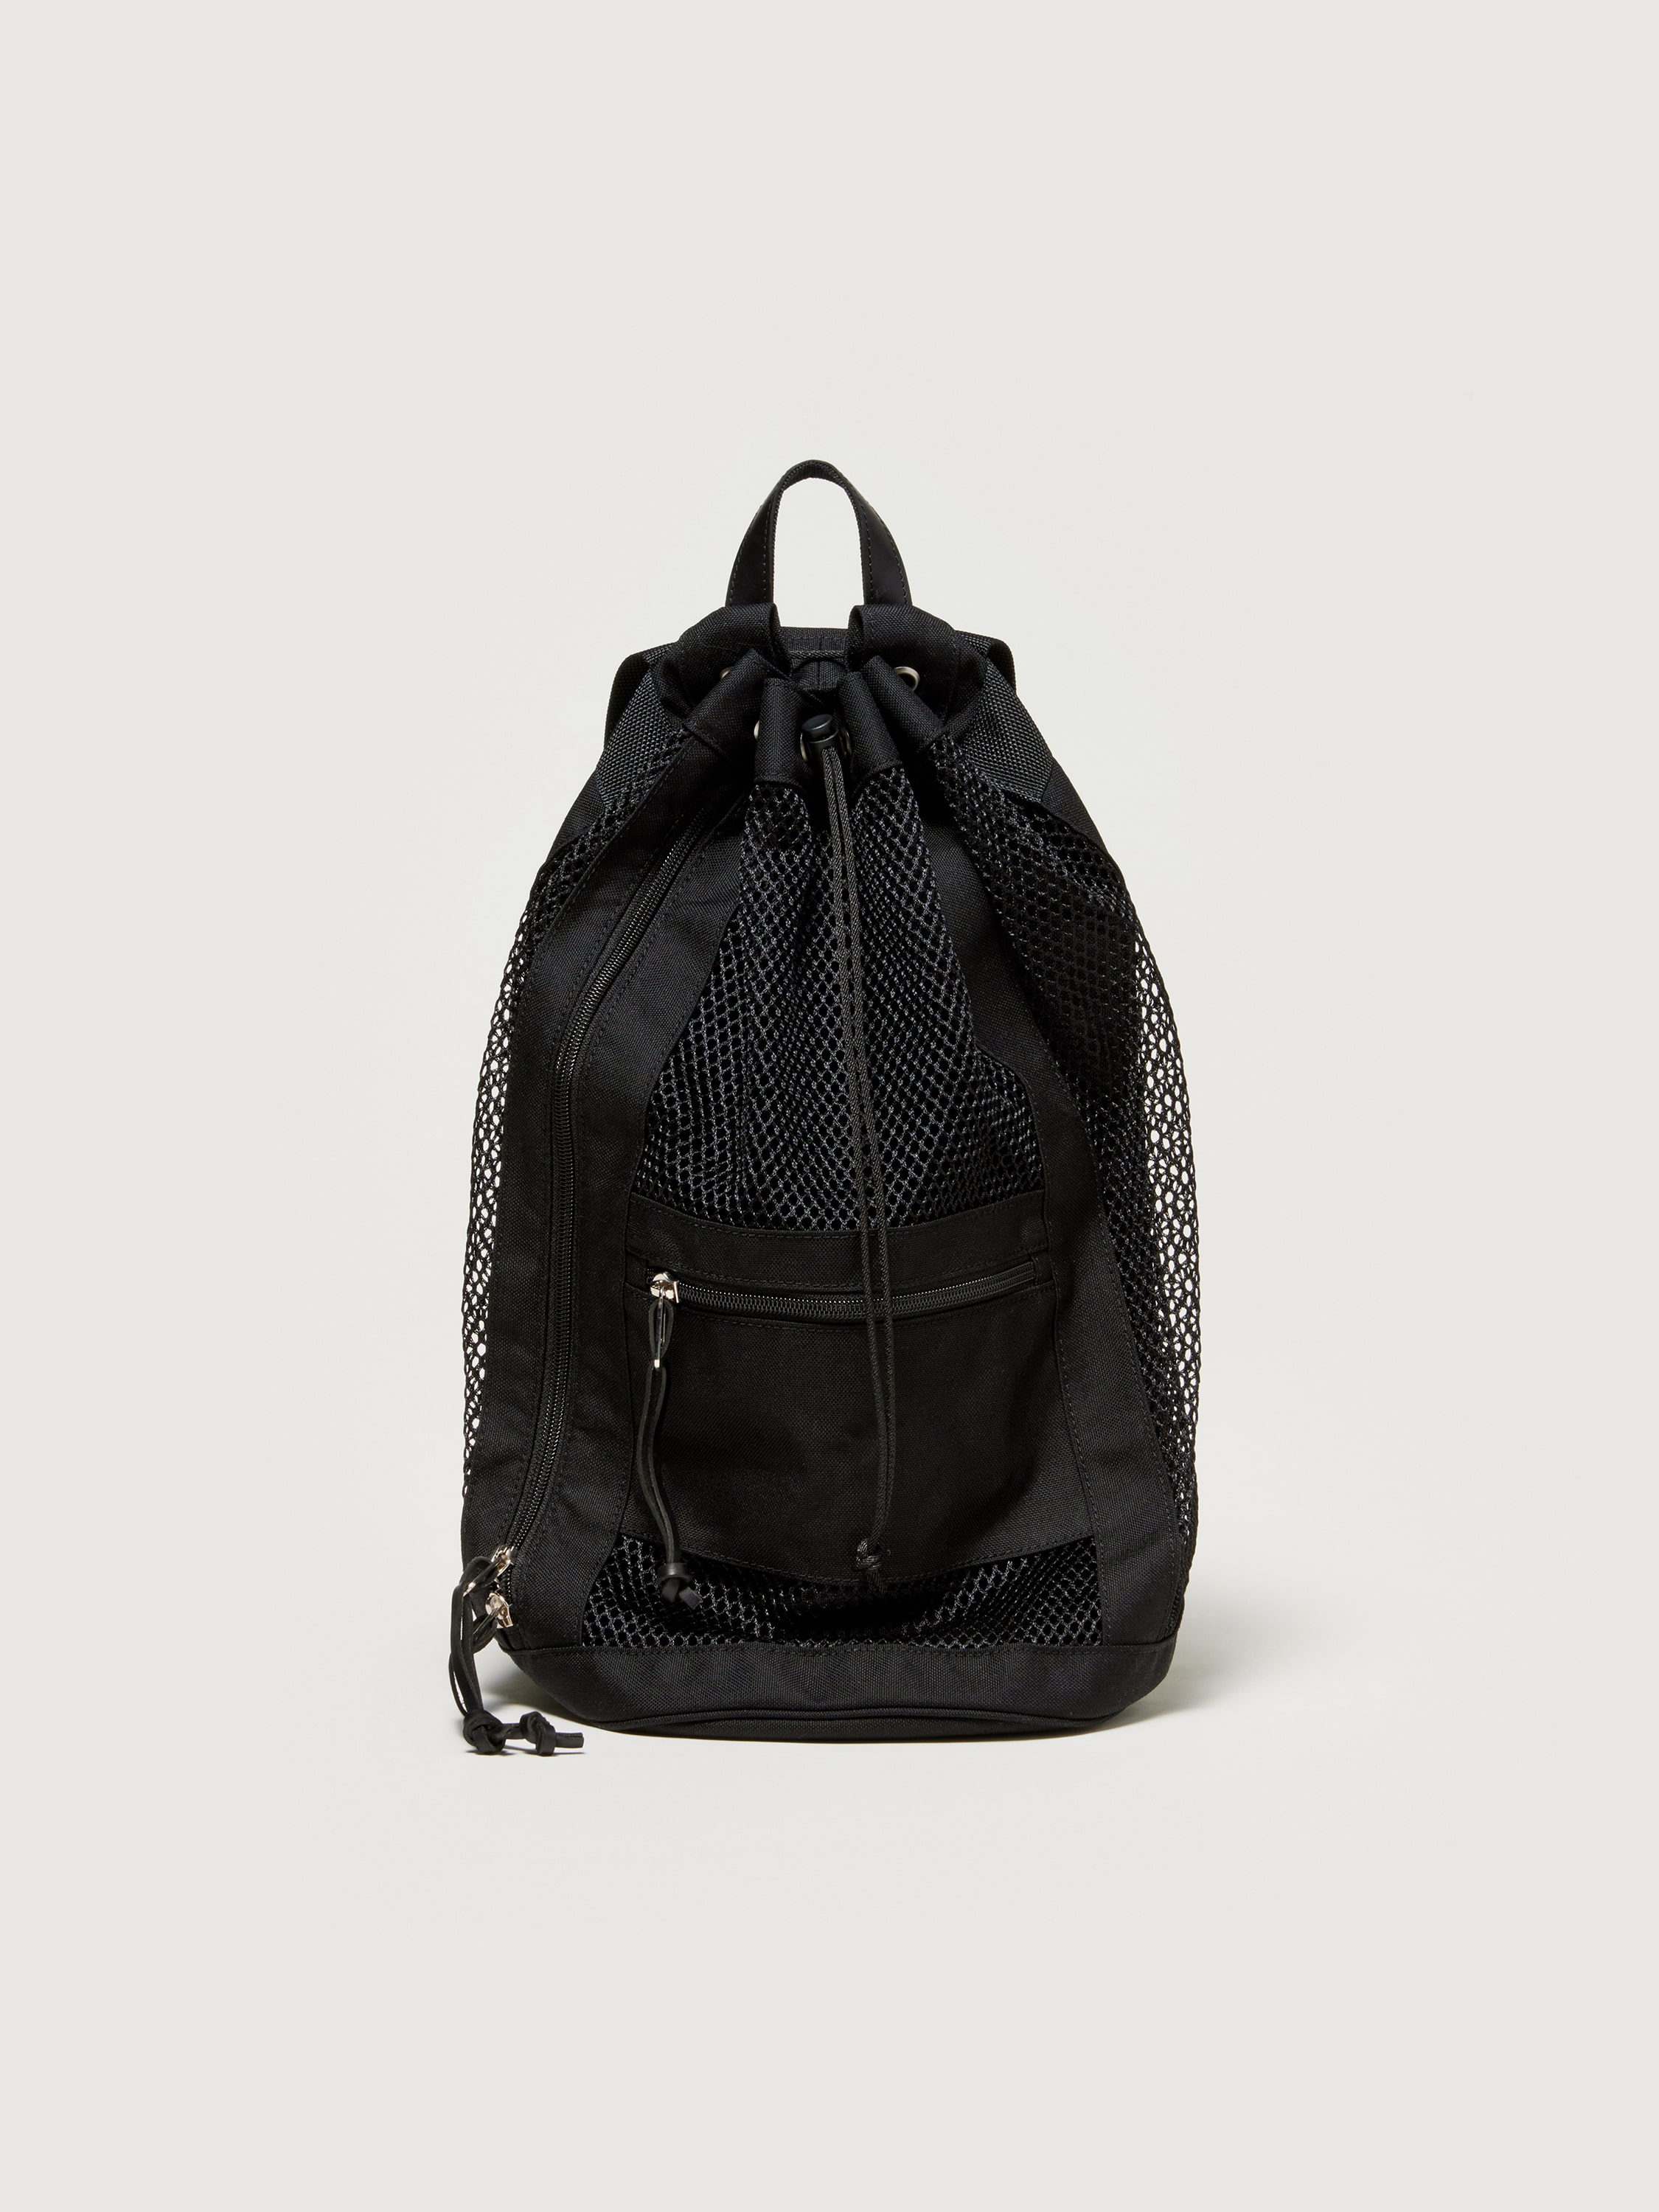 MESH SMALL BACKPACK MADE BY AETA 詳細画像 BLACK 1